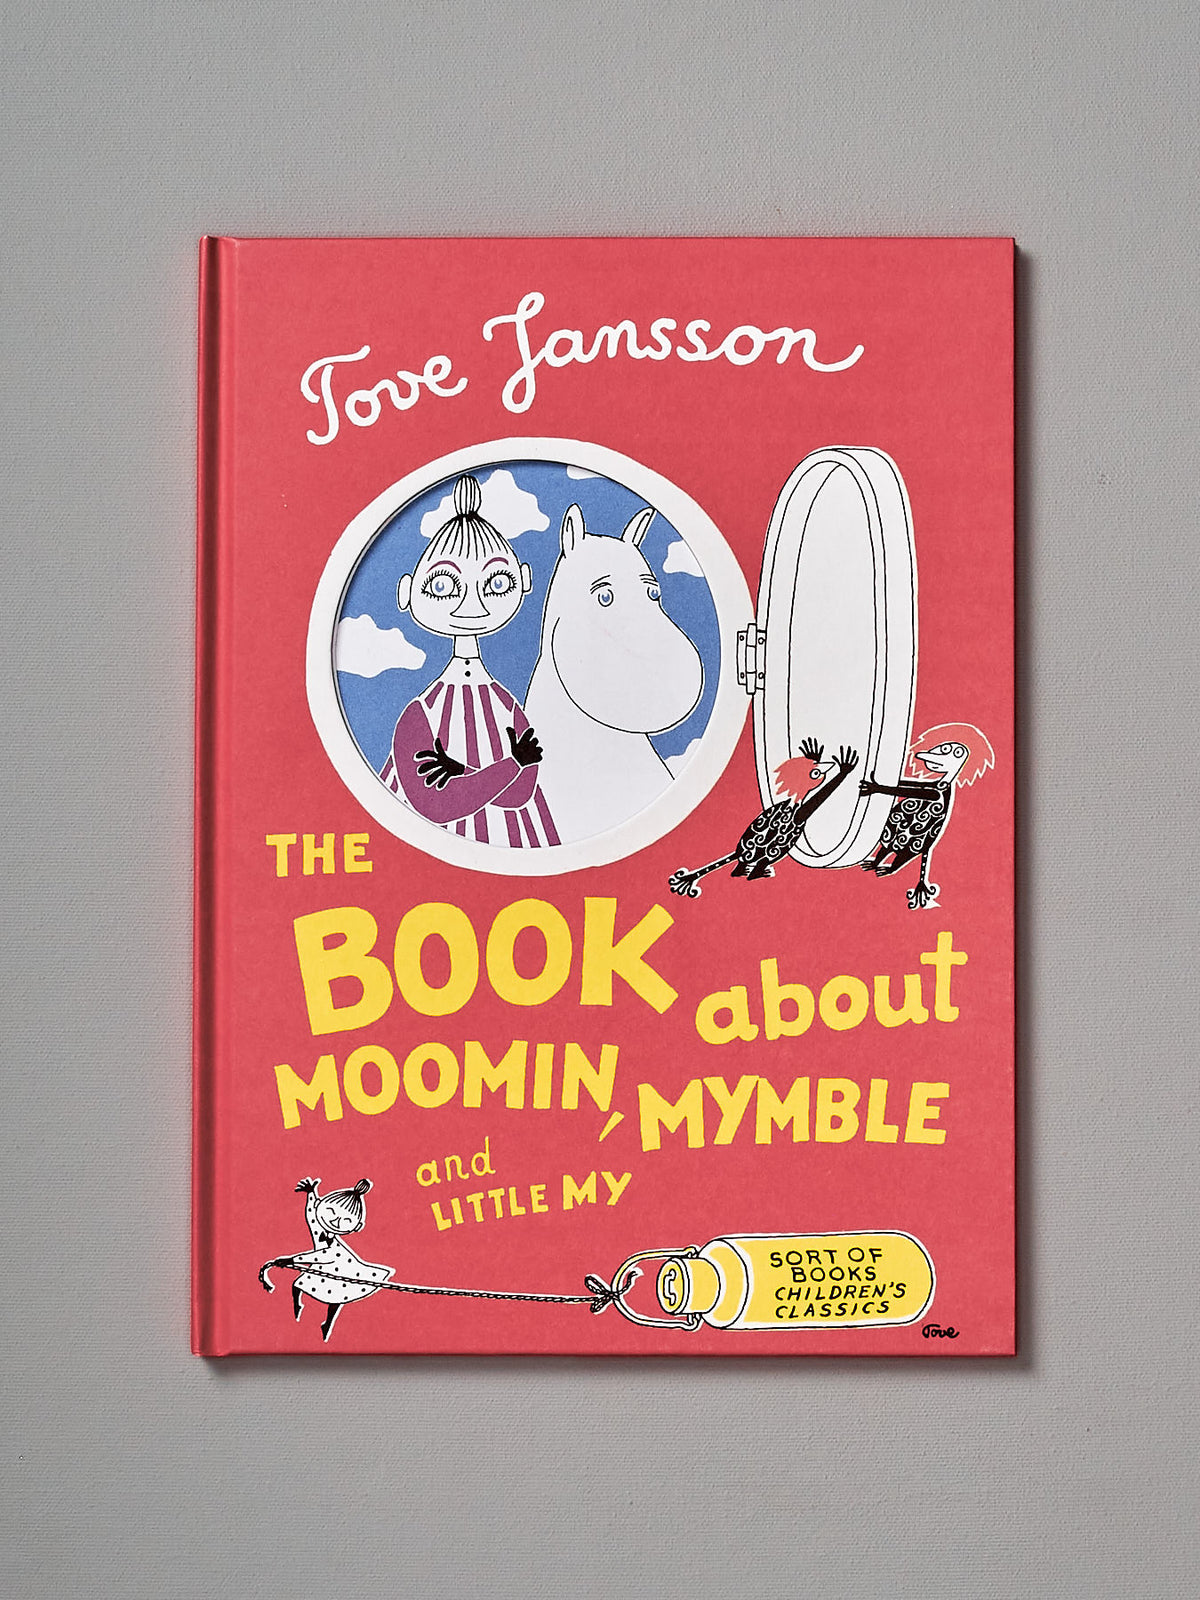 The Tove Jansson book about Moomin&#39;s Little Myble.